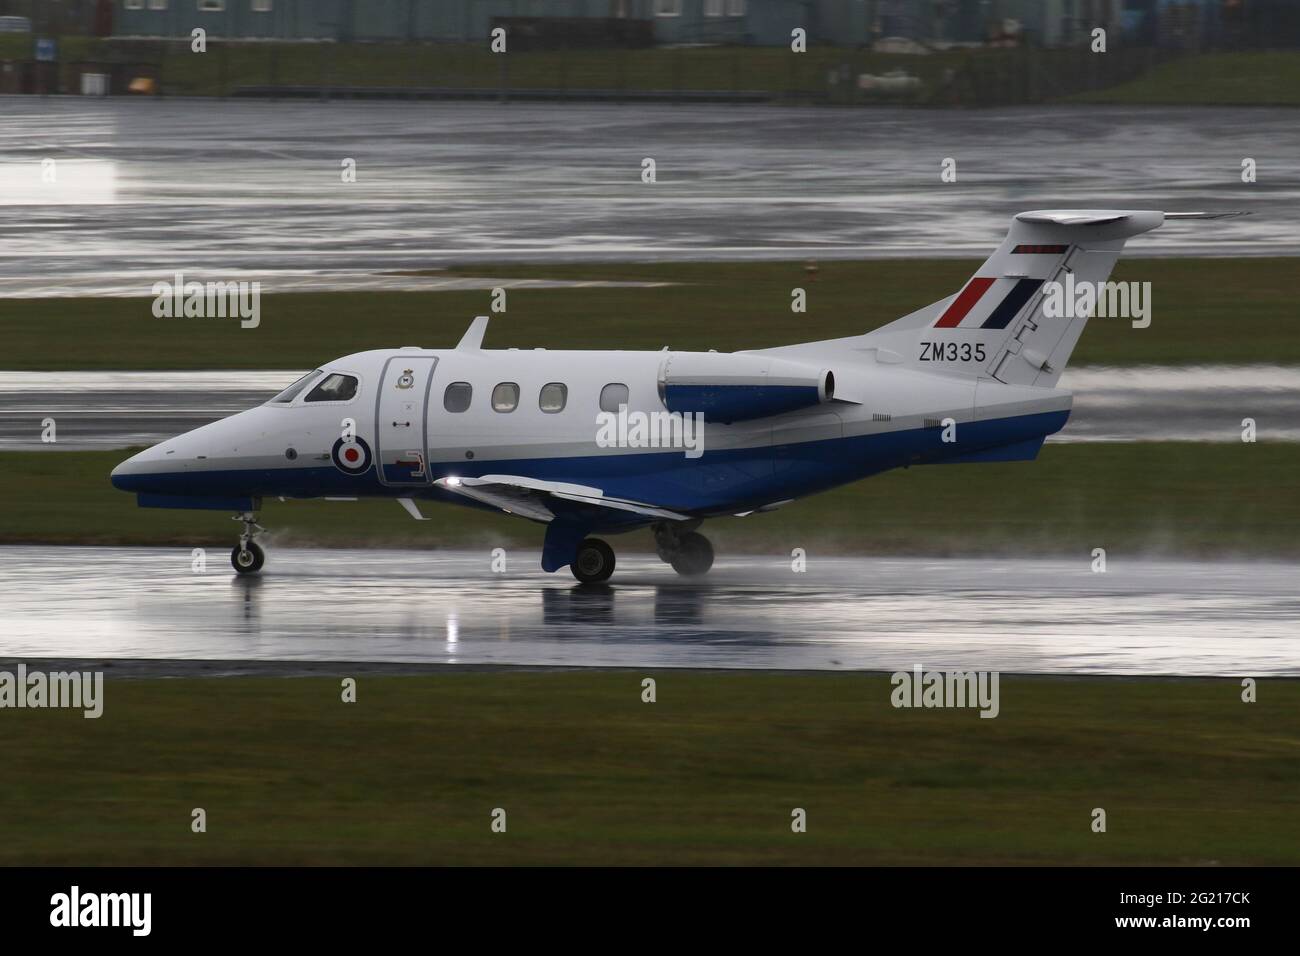 ZM335, an Embraer Phenom T.1 operated by No.45 Squadron of the Royal Air Force, departing from Prestwick International Airport in Ayrshire, Scotland. Stock Photo